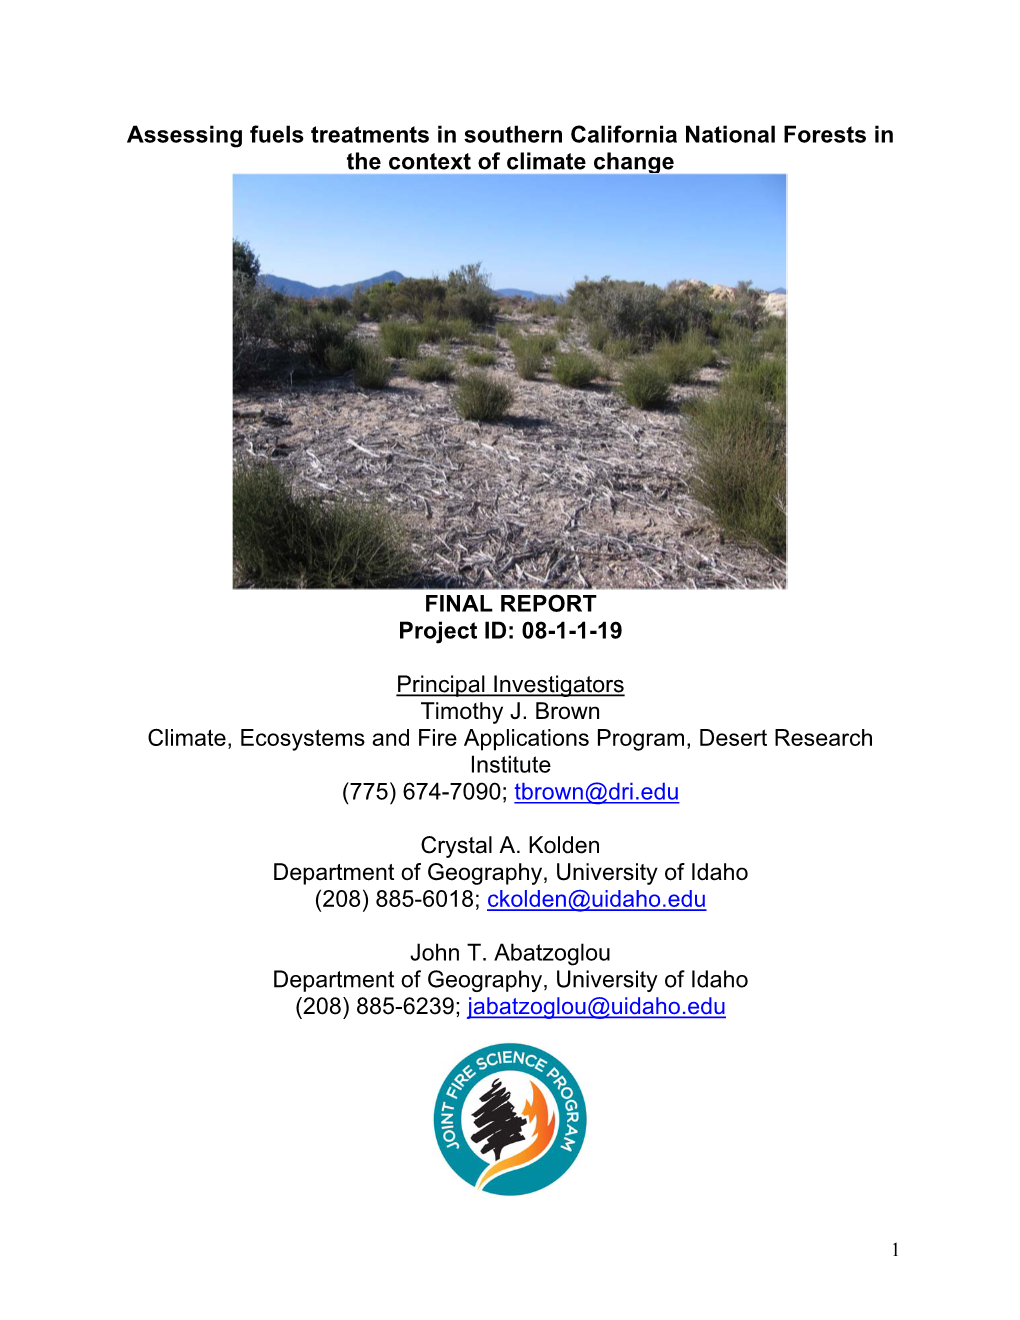 Assessing Fuels Treatments in Southern California National Forests in the Context of Climate Change FINAL REPORT Project ID